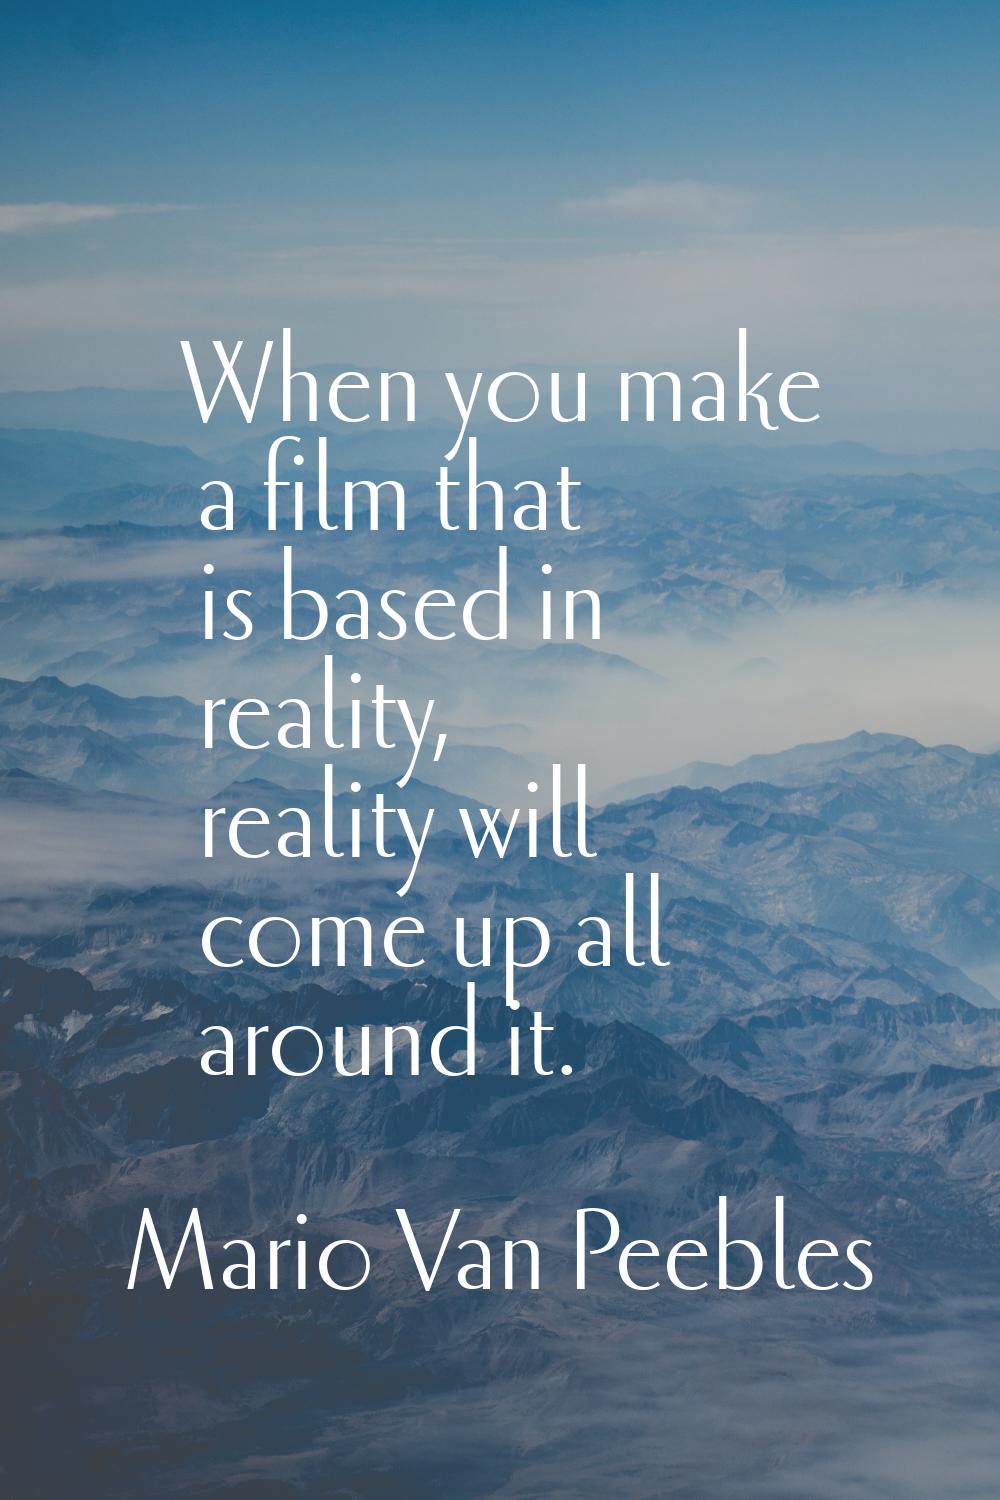 When you make a film that is based in reality, reality will come up all around it.